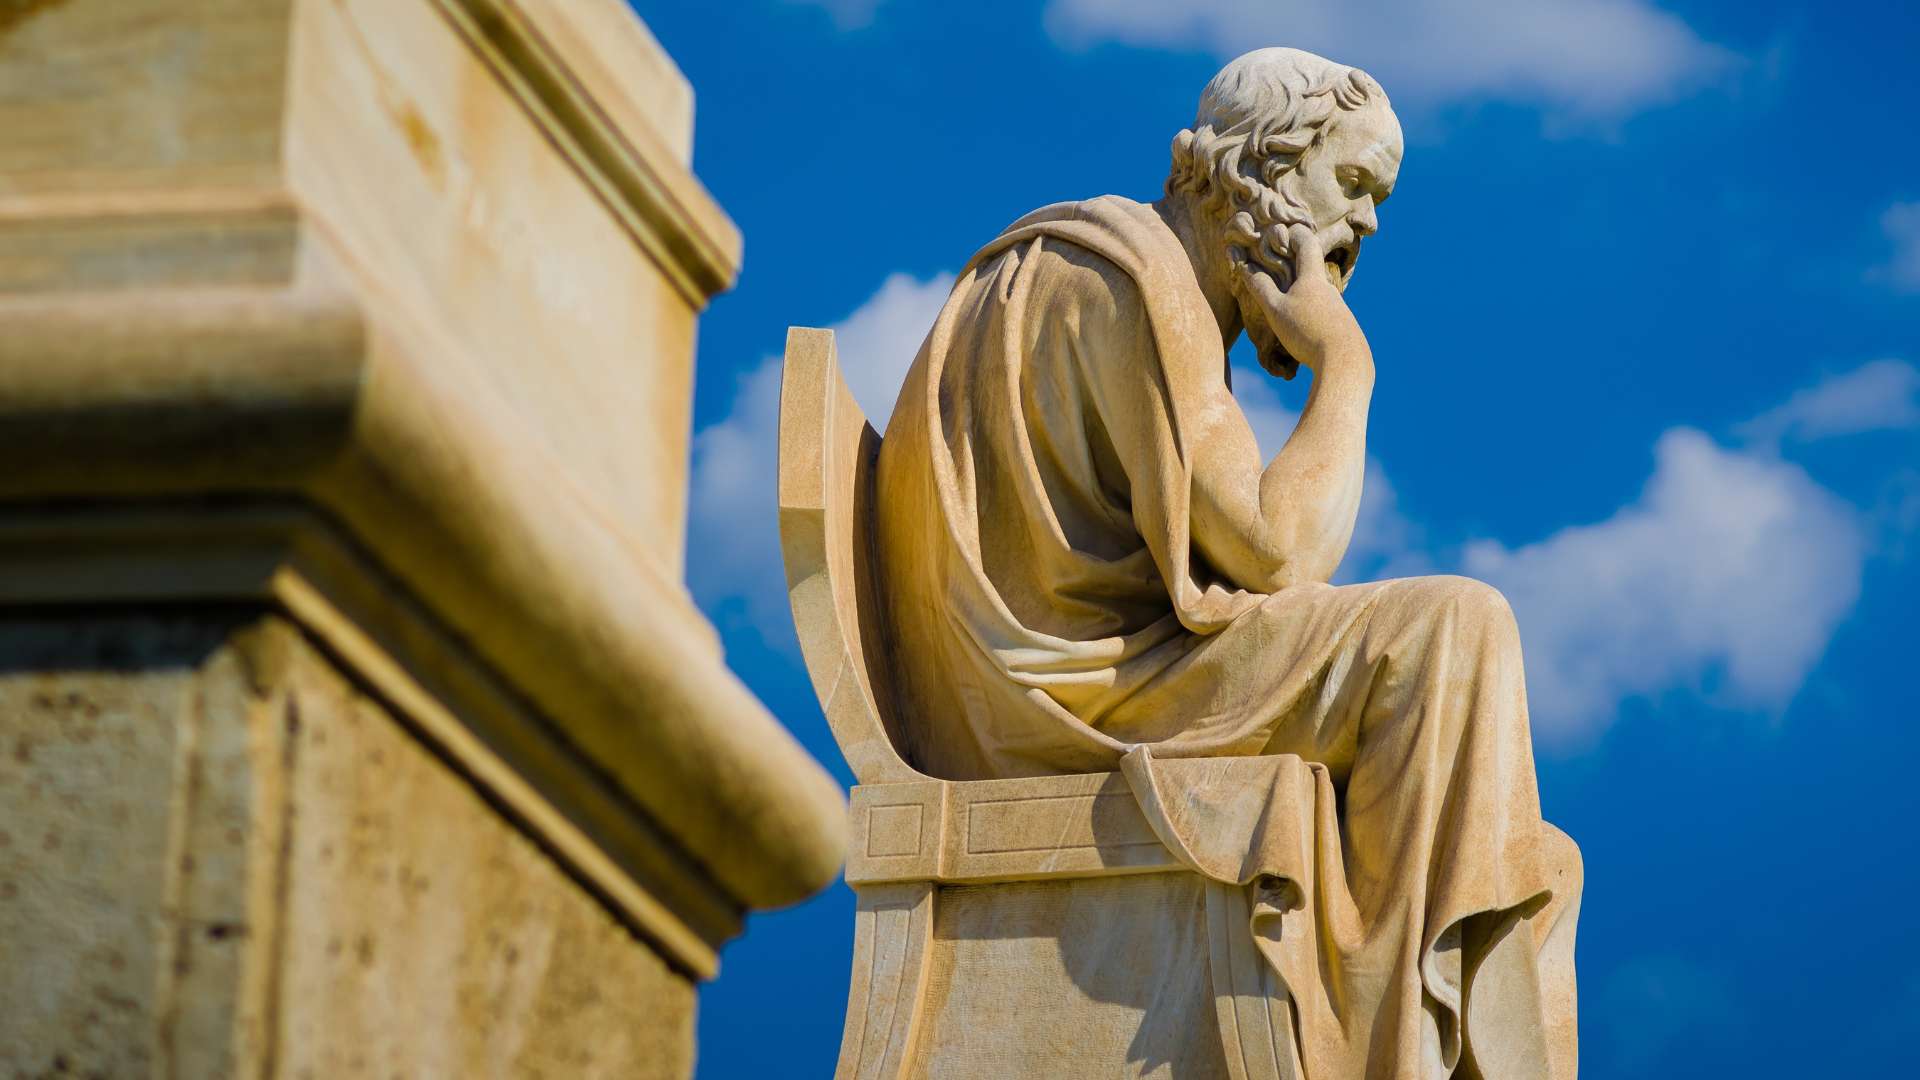 Socrates: The Philosopher Who Inspires BeeYond Travel's Vision and Wisdom